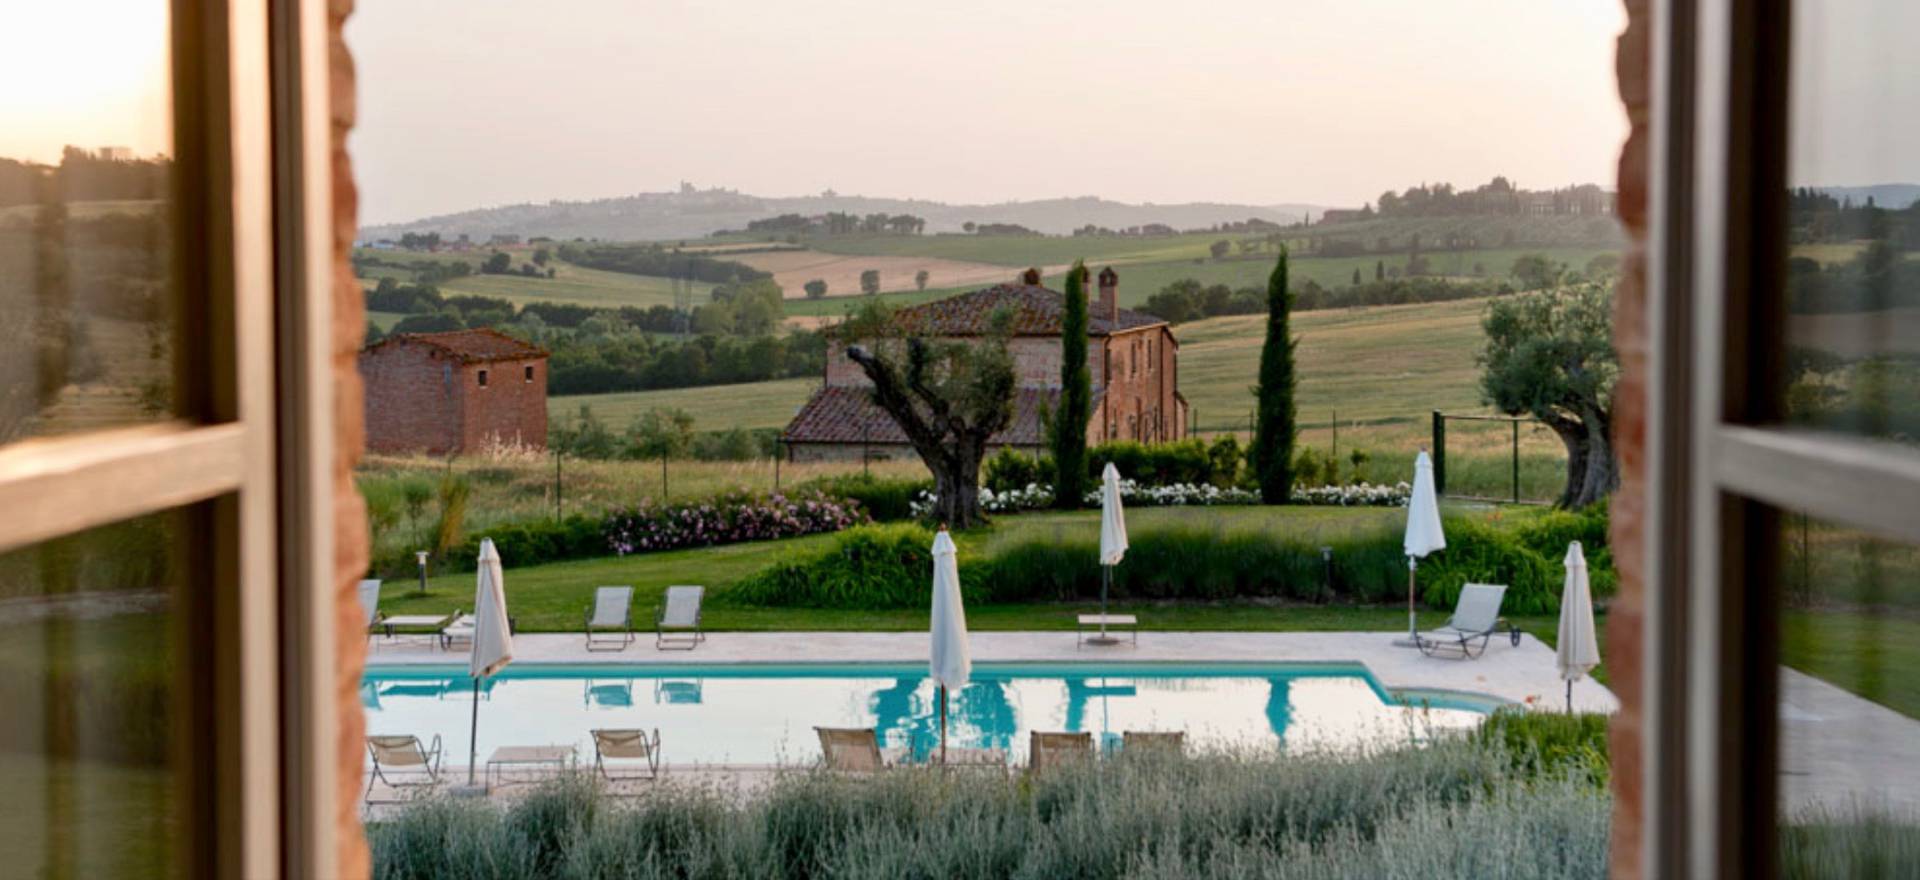 Agriturismo Tuscany Agriturismo Tuscany, very attractive and hospitable